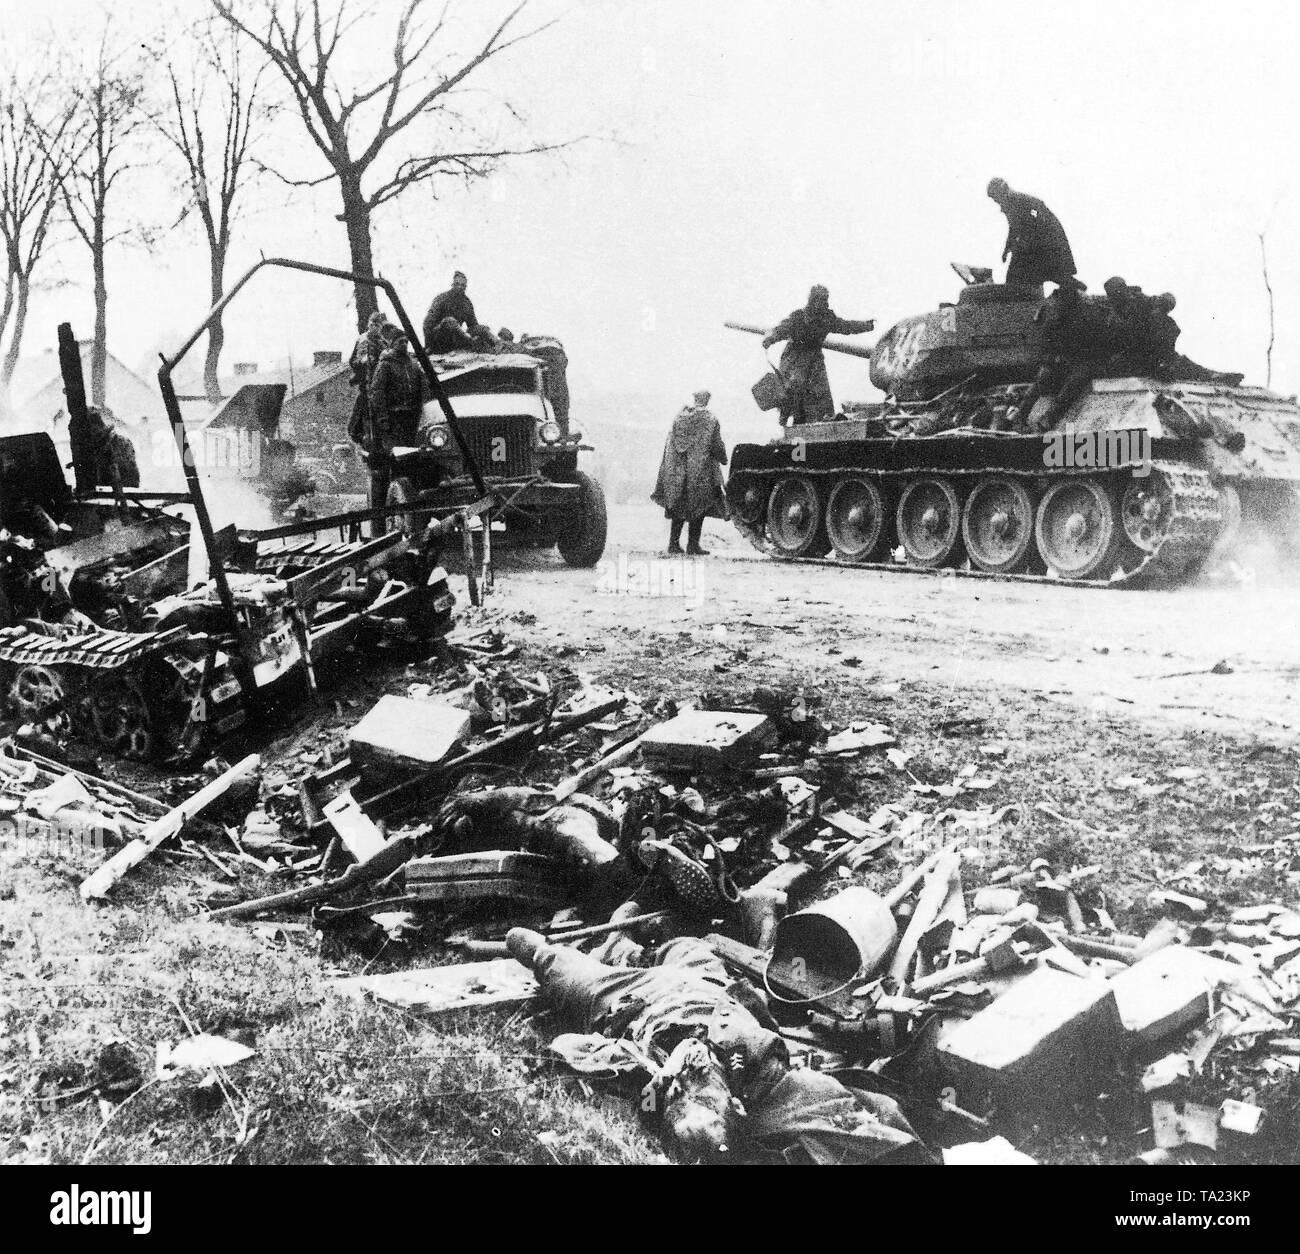 Russian T-34 tank at Berlin. Second World War, Battle of Berlin in 1945. The defensive ring around the imperial capital has collapsed. The tanks of the Red Army advance toward the city, passing by dead German soldiers and ruined defensive positions. Stock Photo